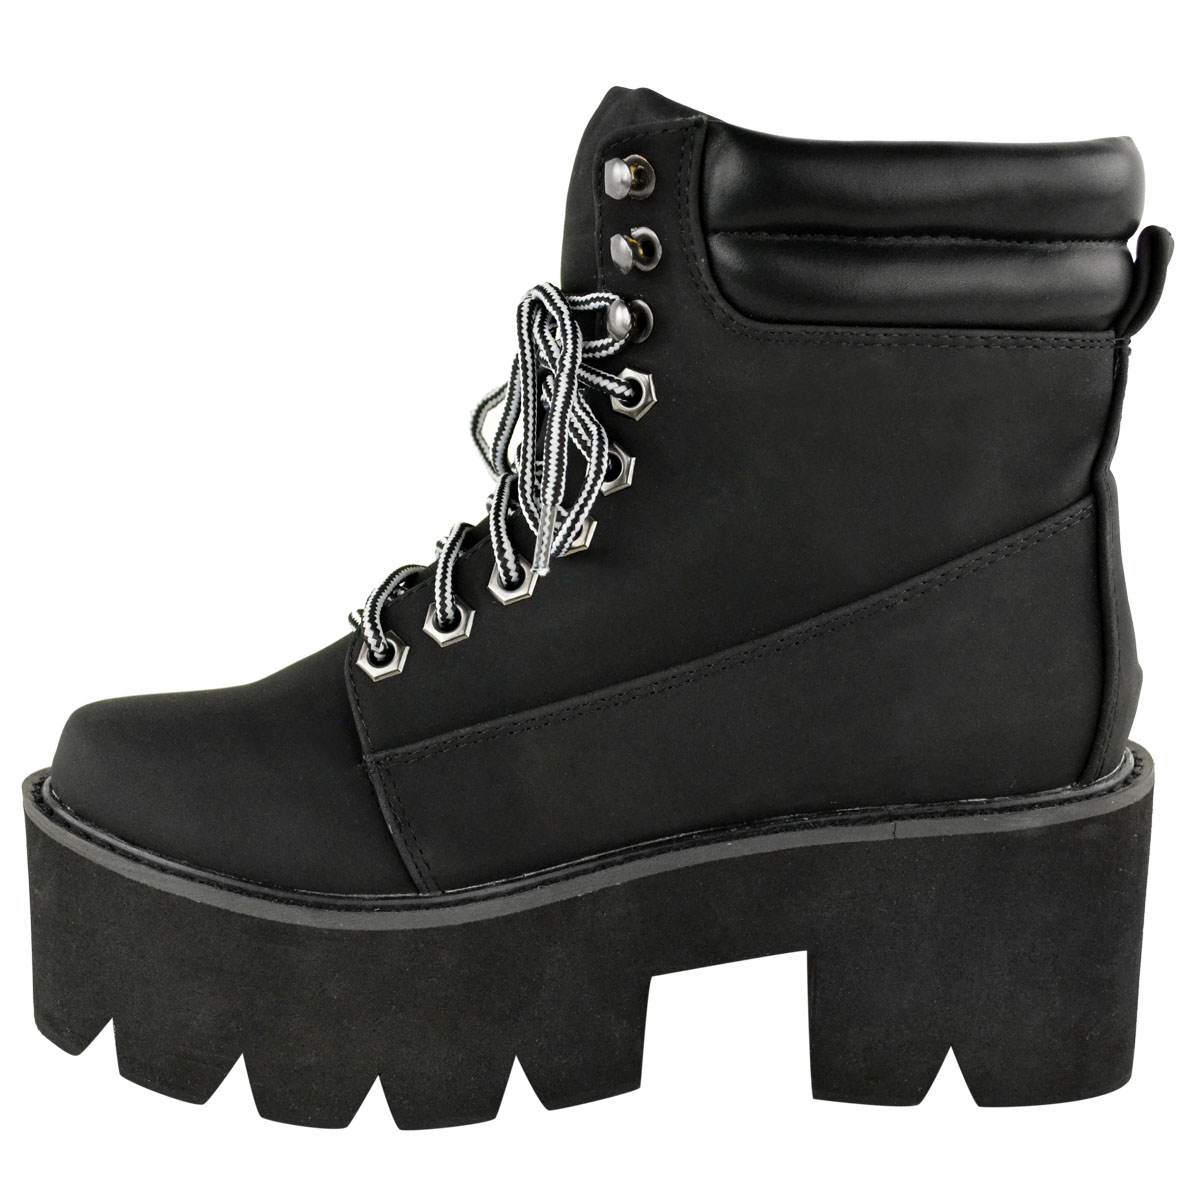 LADIES WOMENS CHUNKY CLEATED SOLE PLATFORM LACE UP WORKER ANKLE BOOTS ...